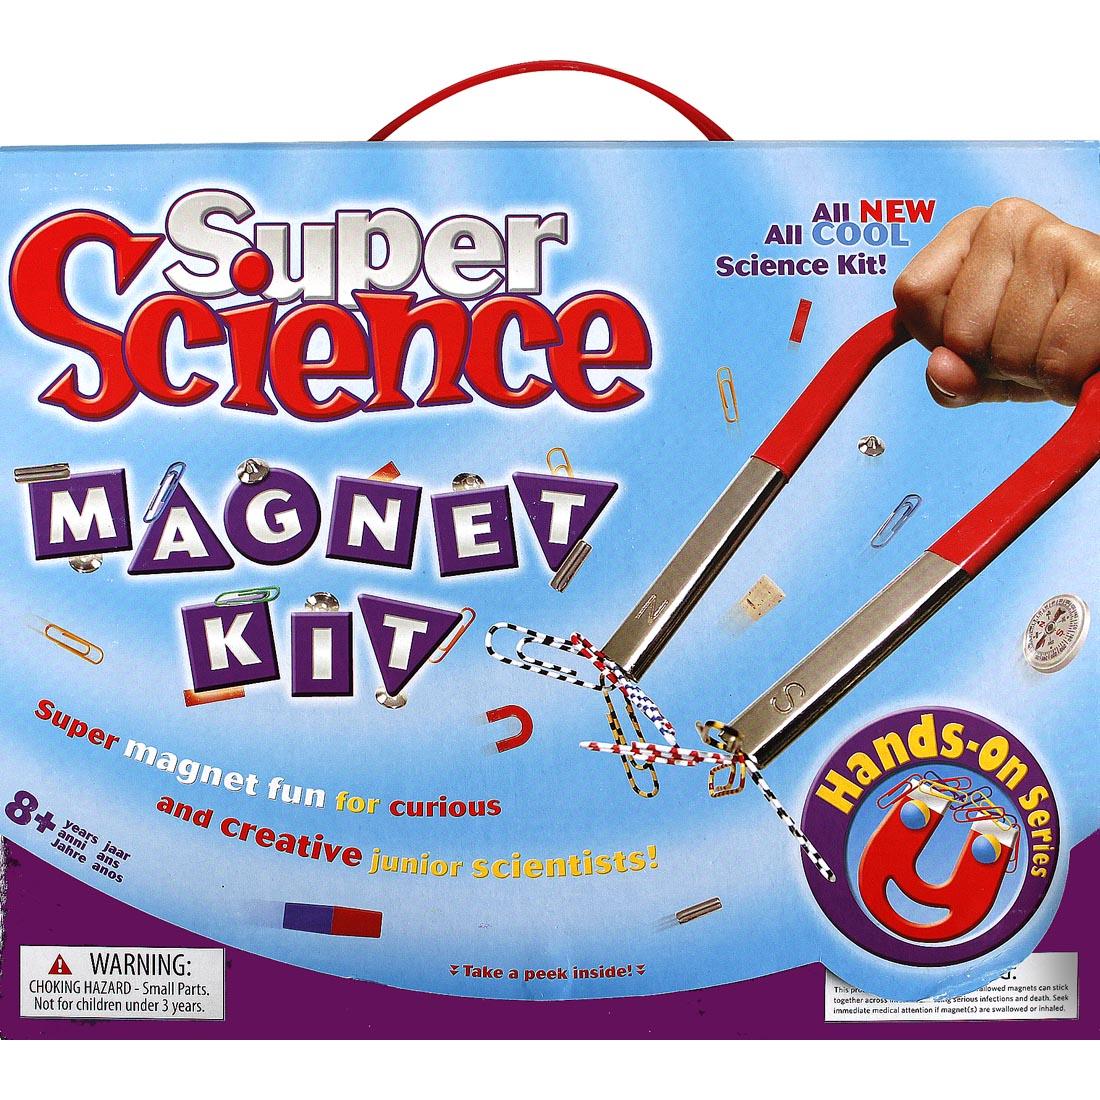 Super Science Magnet Kit by Dowling Magnets